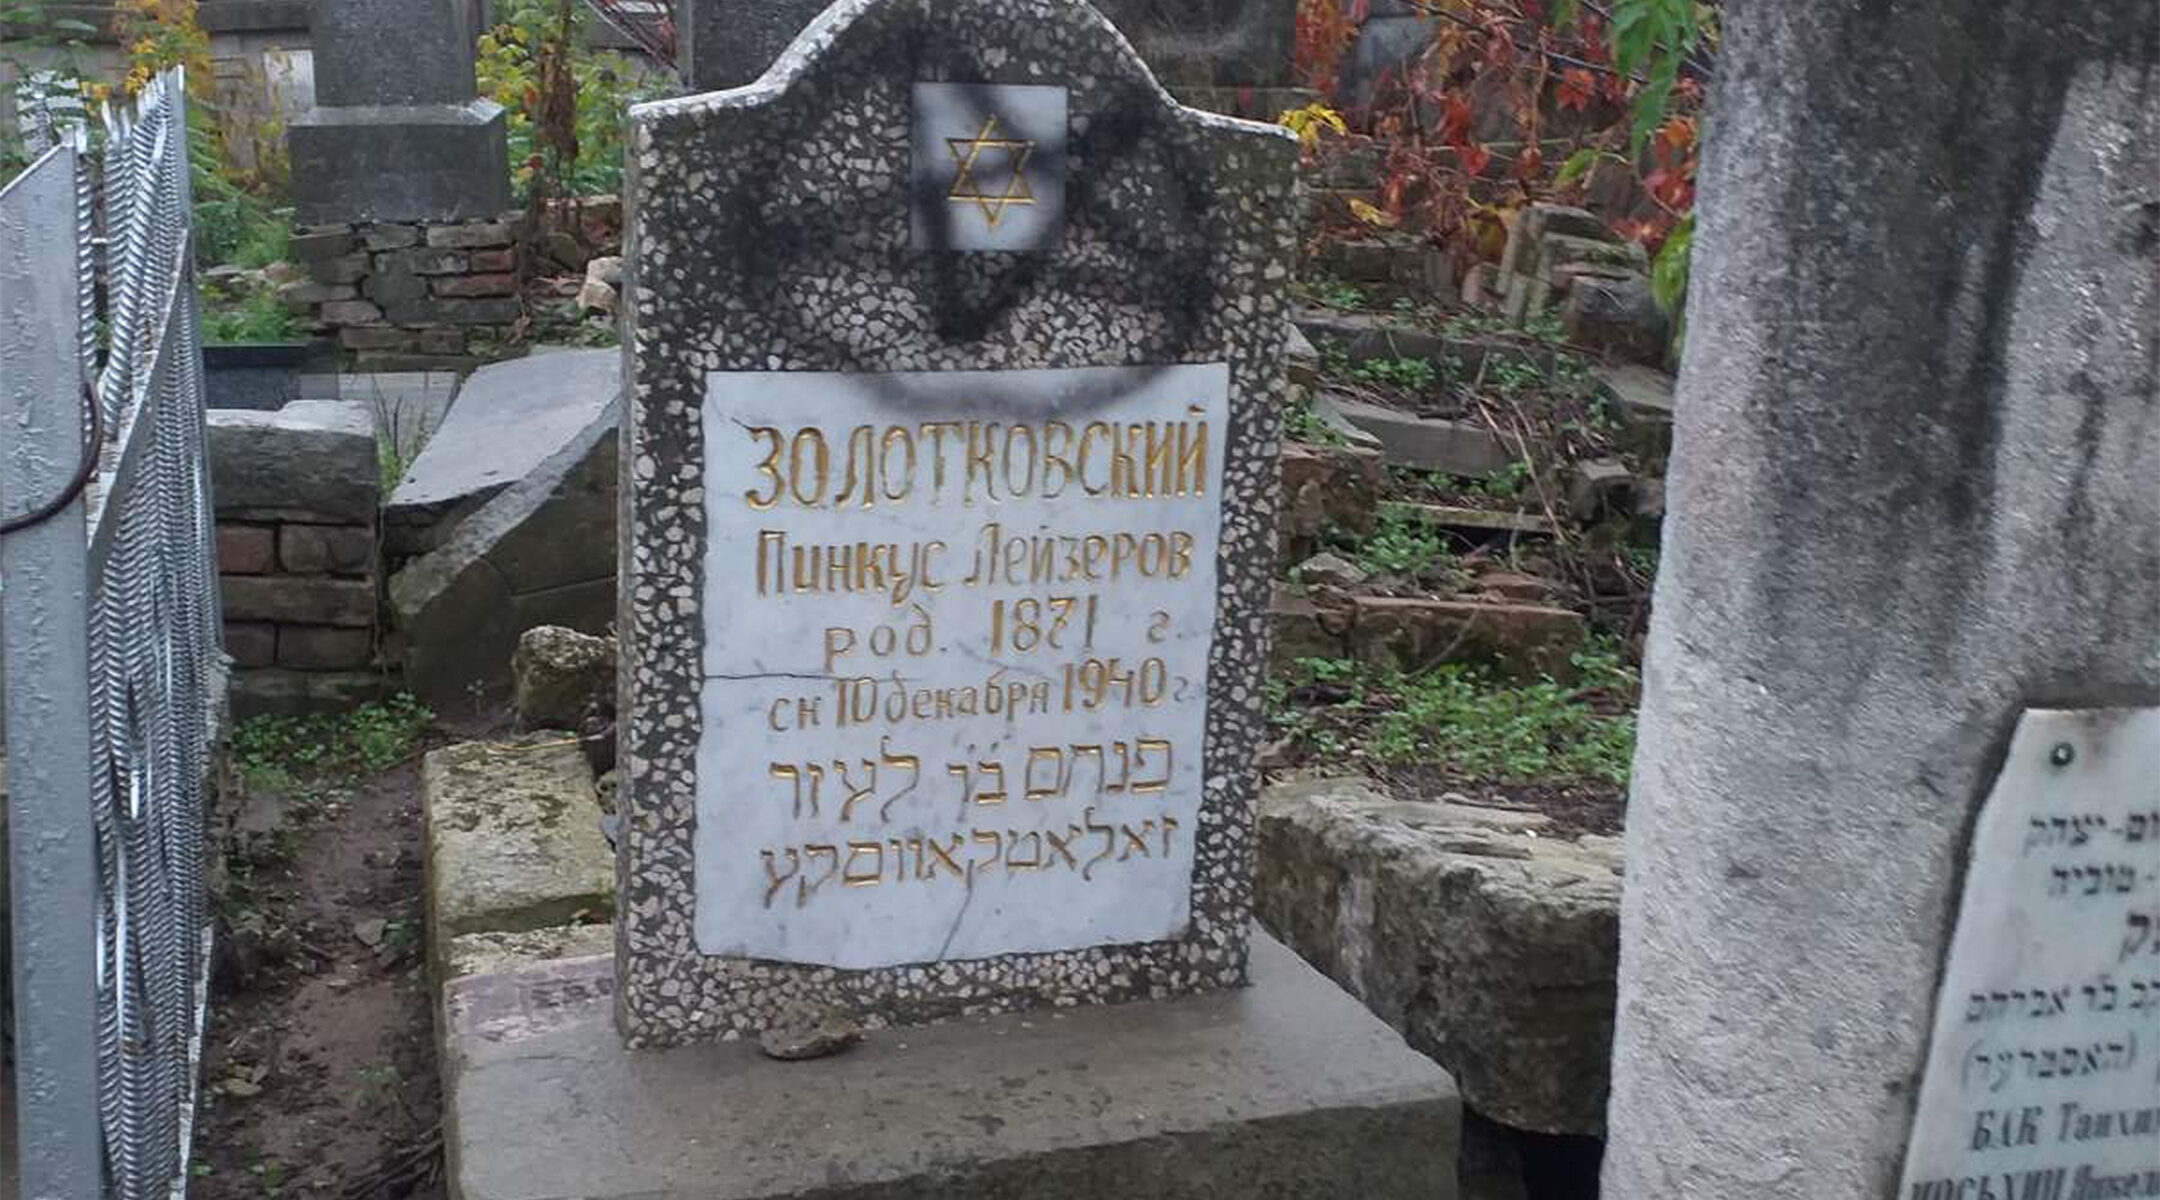 The aftermath of vandalism at a Jewish cemetery in Chisinau, Moldova on Oct. 31, 2020. (Courtesy of the Jewish Community of Moldova)